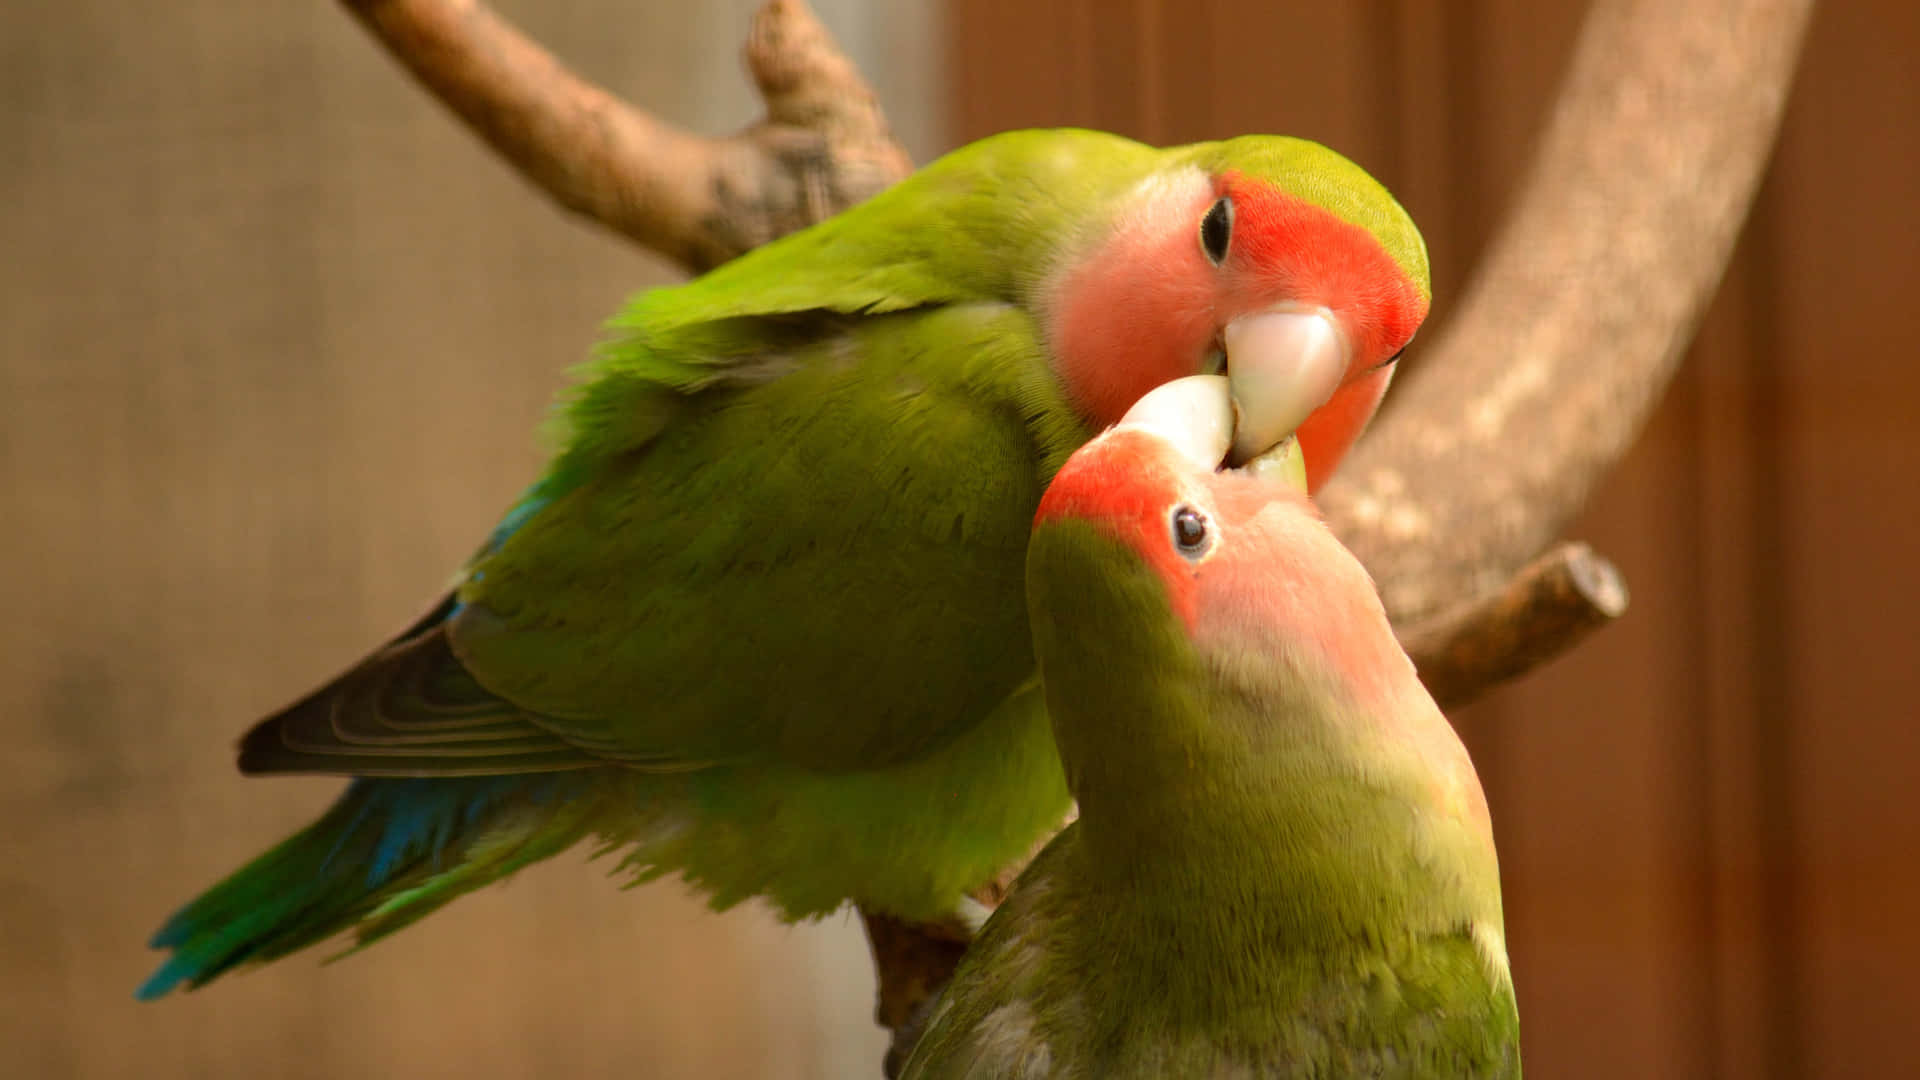 Two love birds embrace one another as a sign of their undying love.